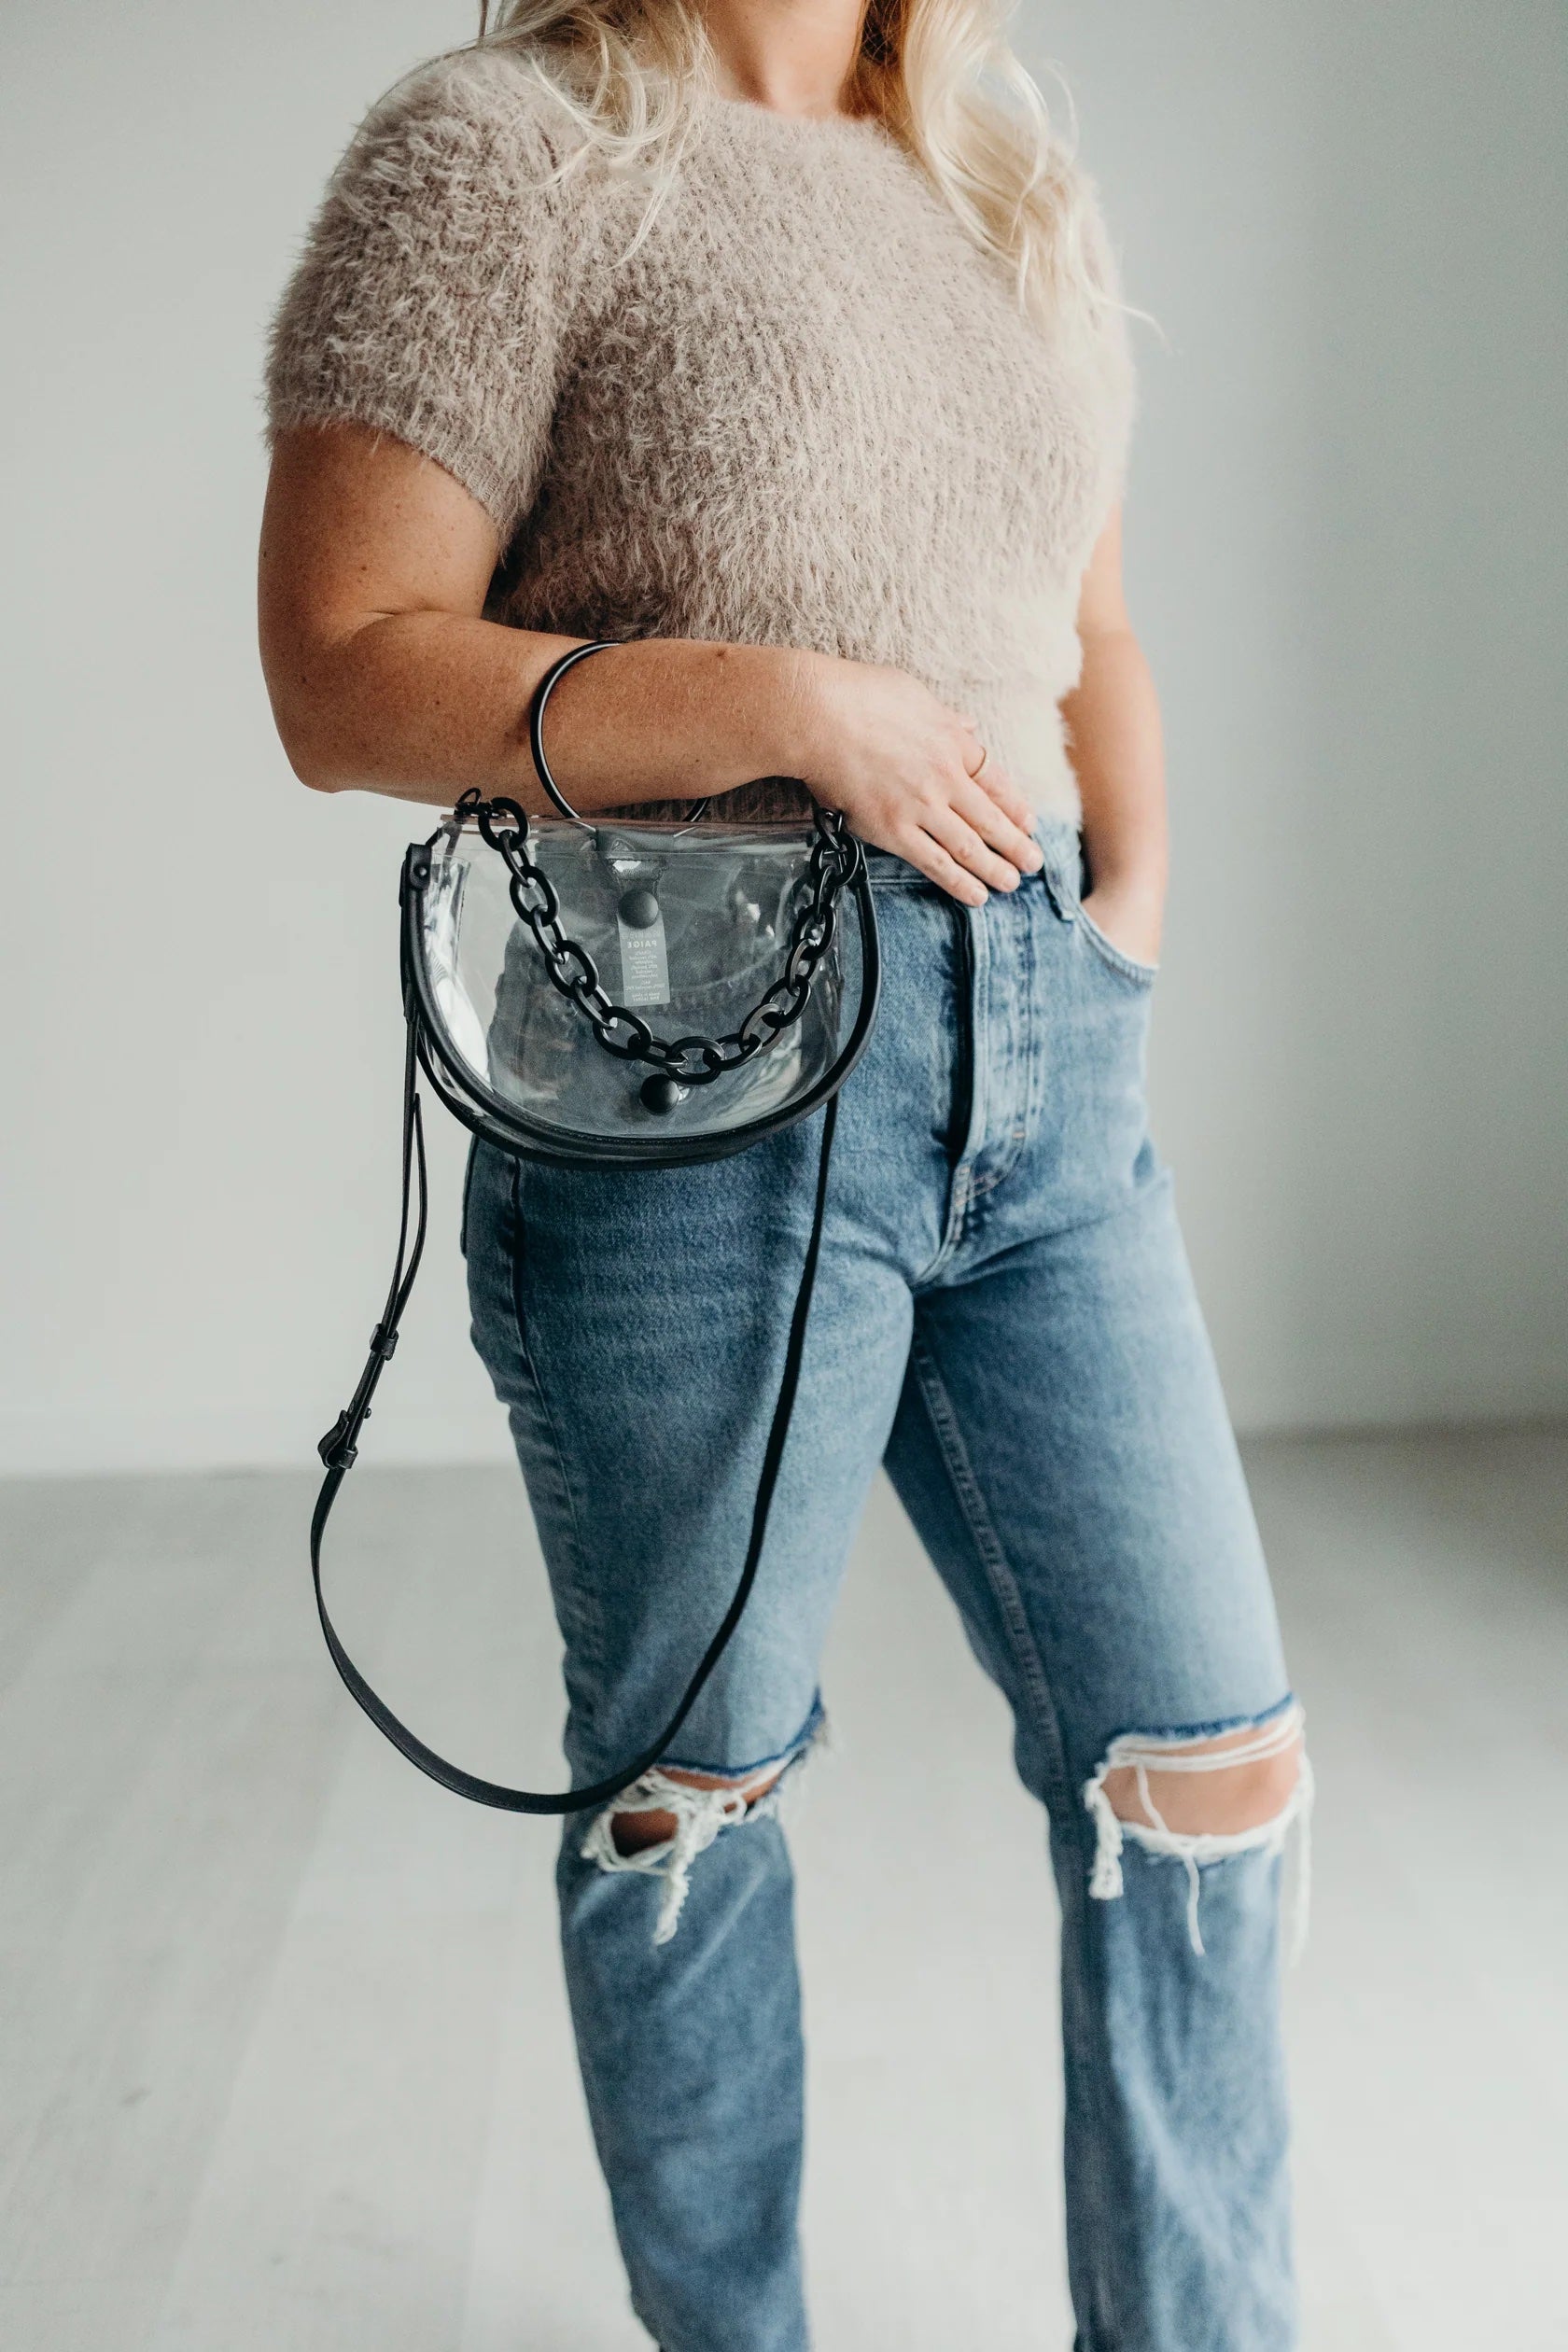 Margo Paige Sustainable Clear Bags Are Fall Must-Haves